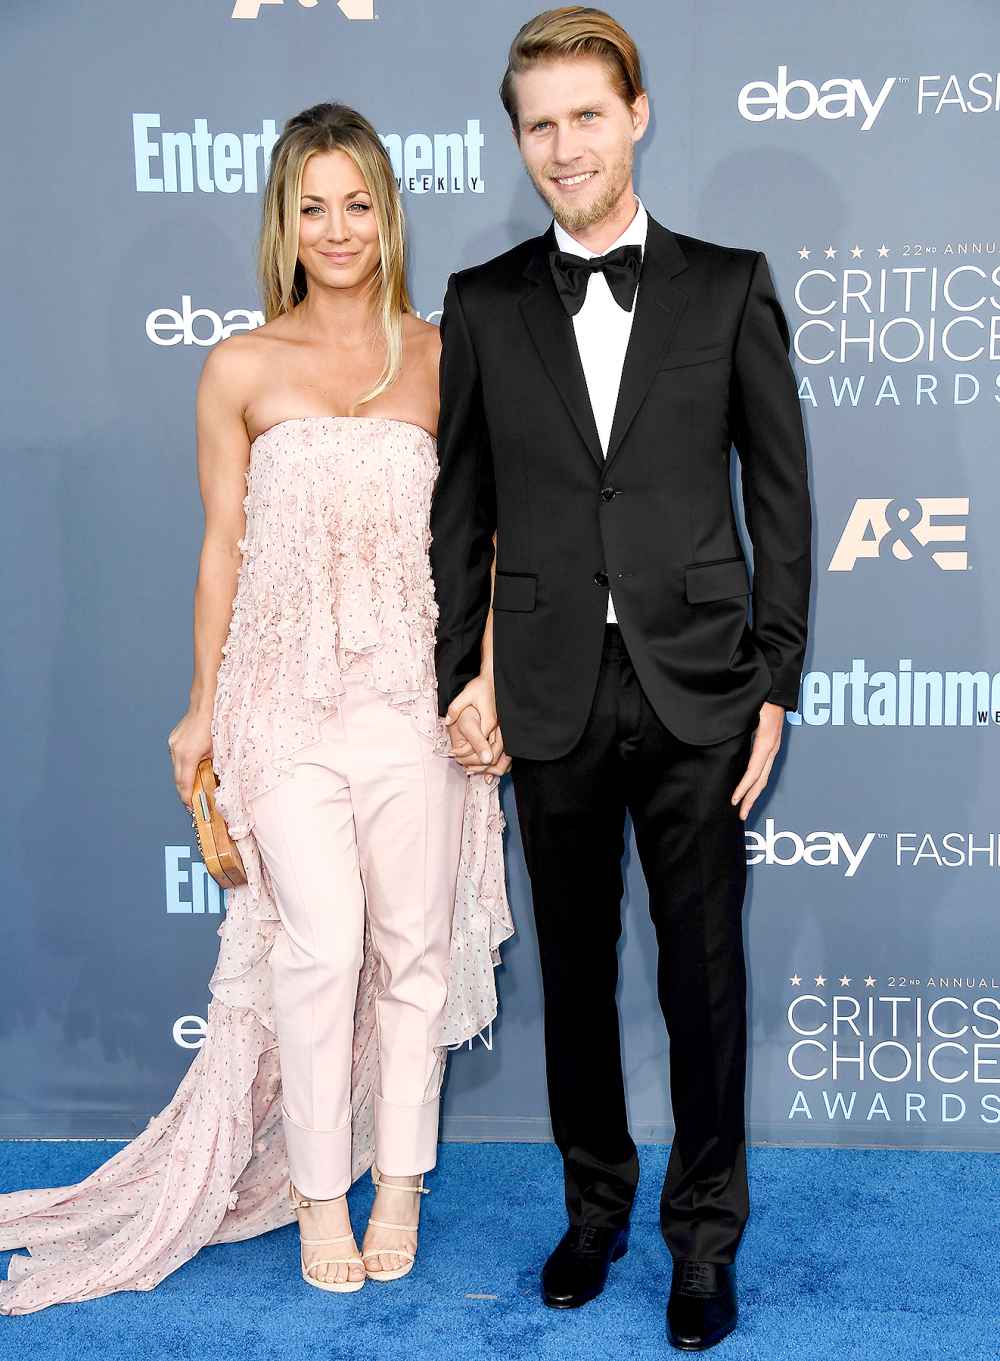 Kaley Cuoco and Karl Cook attend The 22nd Annual Critics' Choice Awards at Barker Hangar on December 11, 2016 in Santa Monica, California.